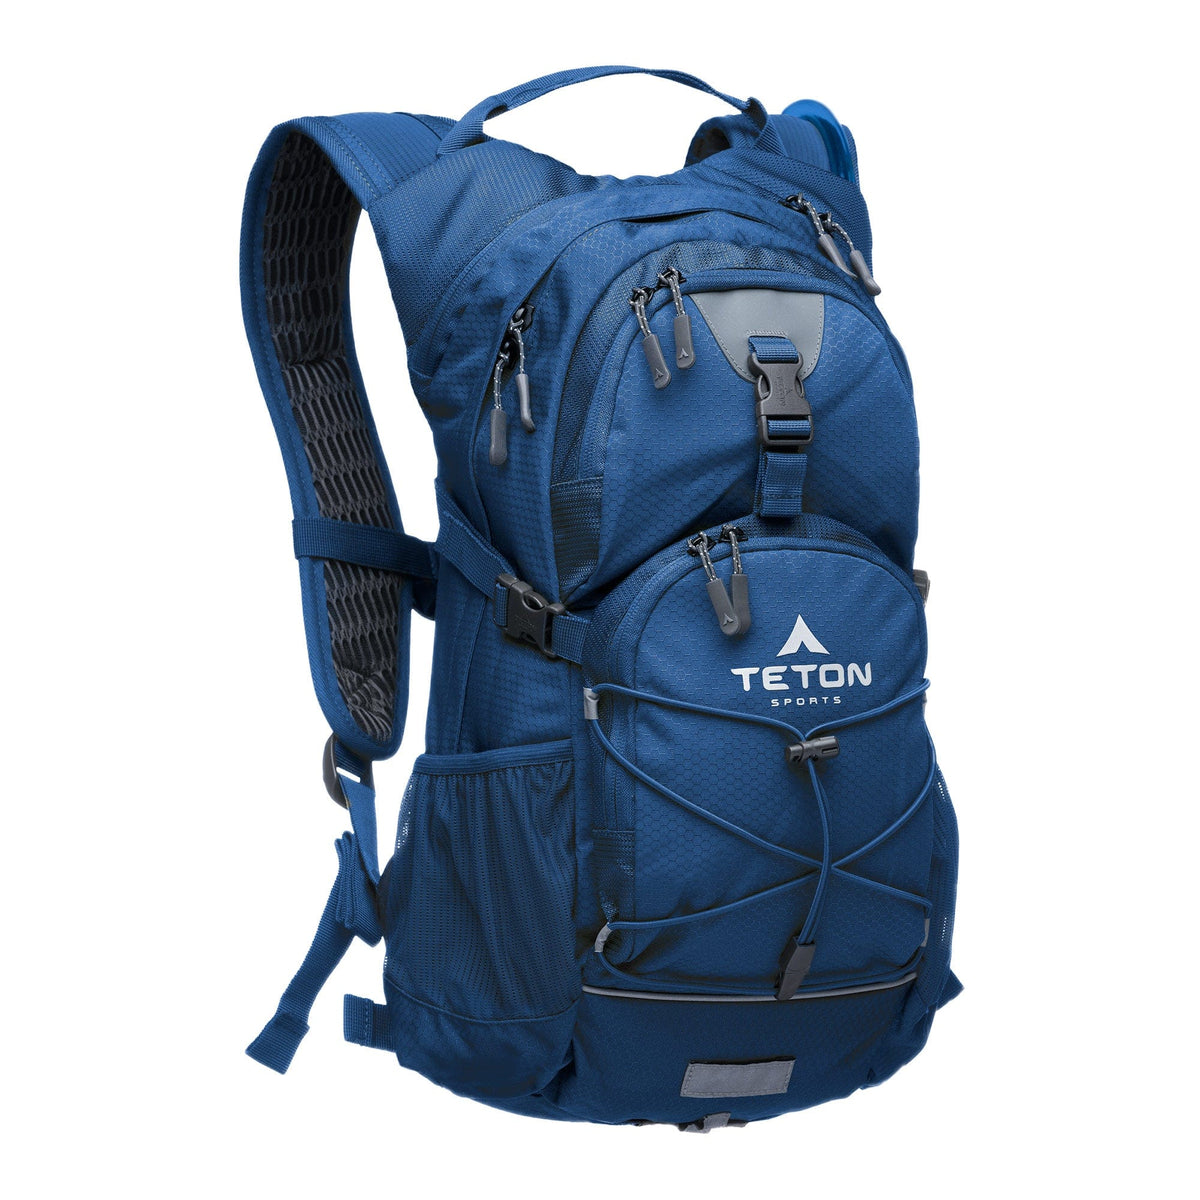 TETON Sports Oasis 22L Hydration Pack - OR Show '24 Venice 2102SCVC-OR